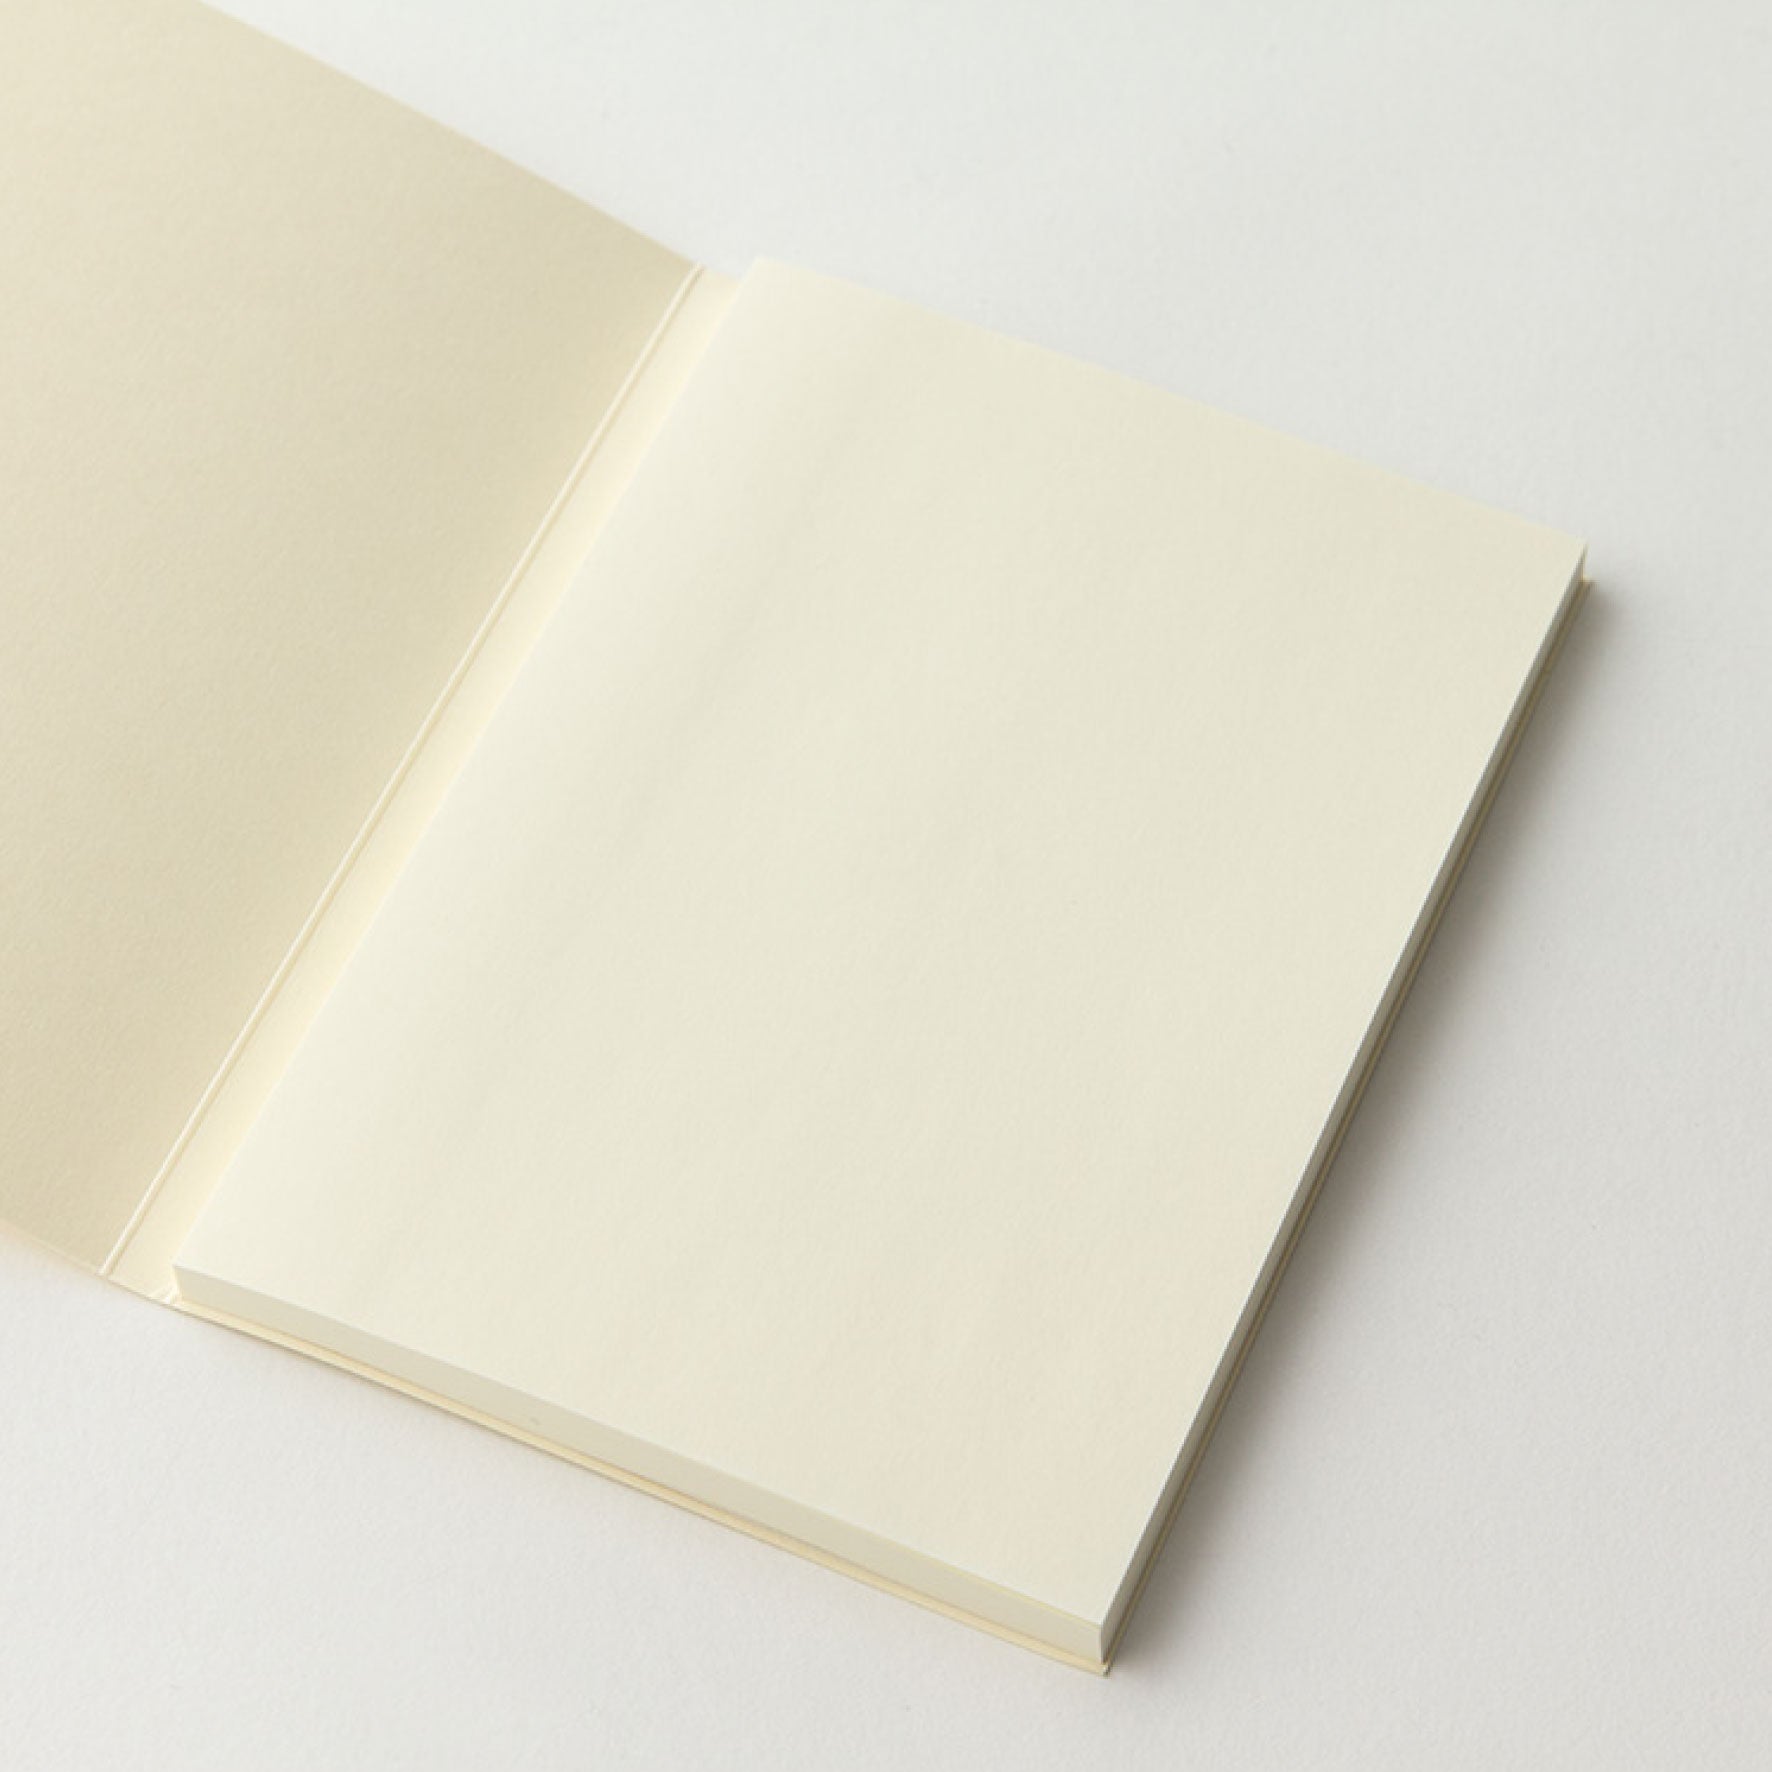 Midori - Notepad - Sticky - A6 - Blank <Outgoing>